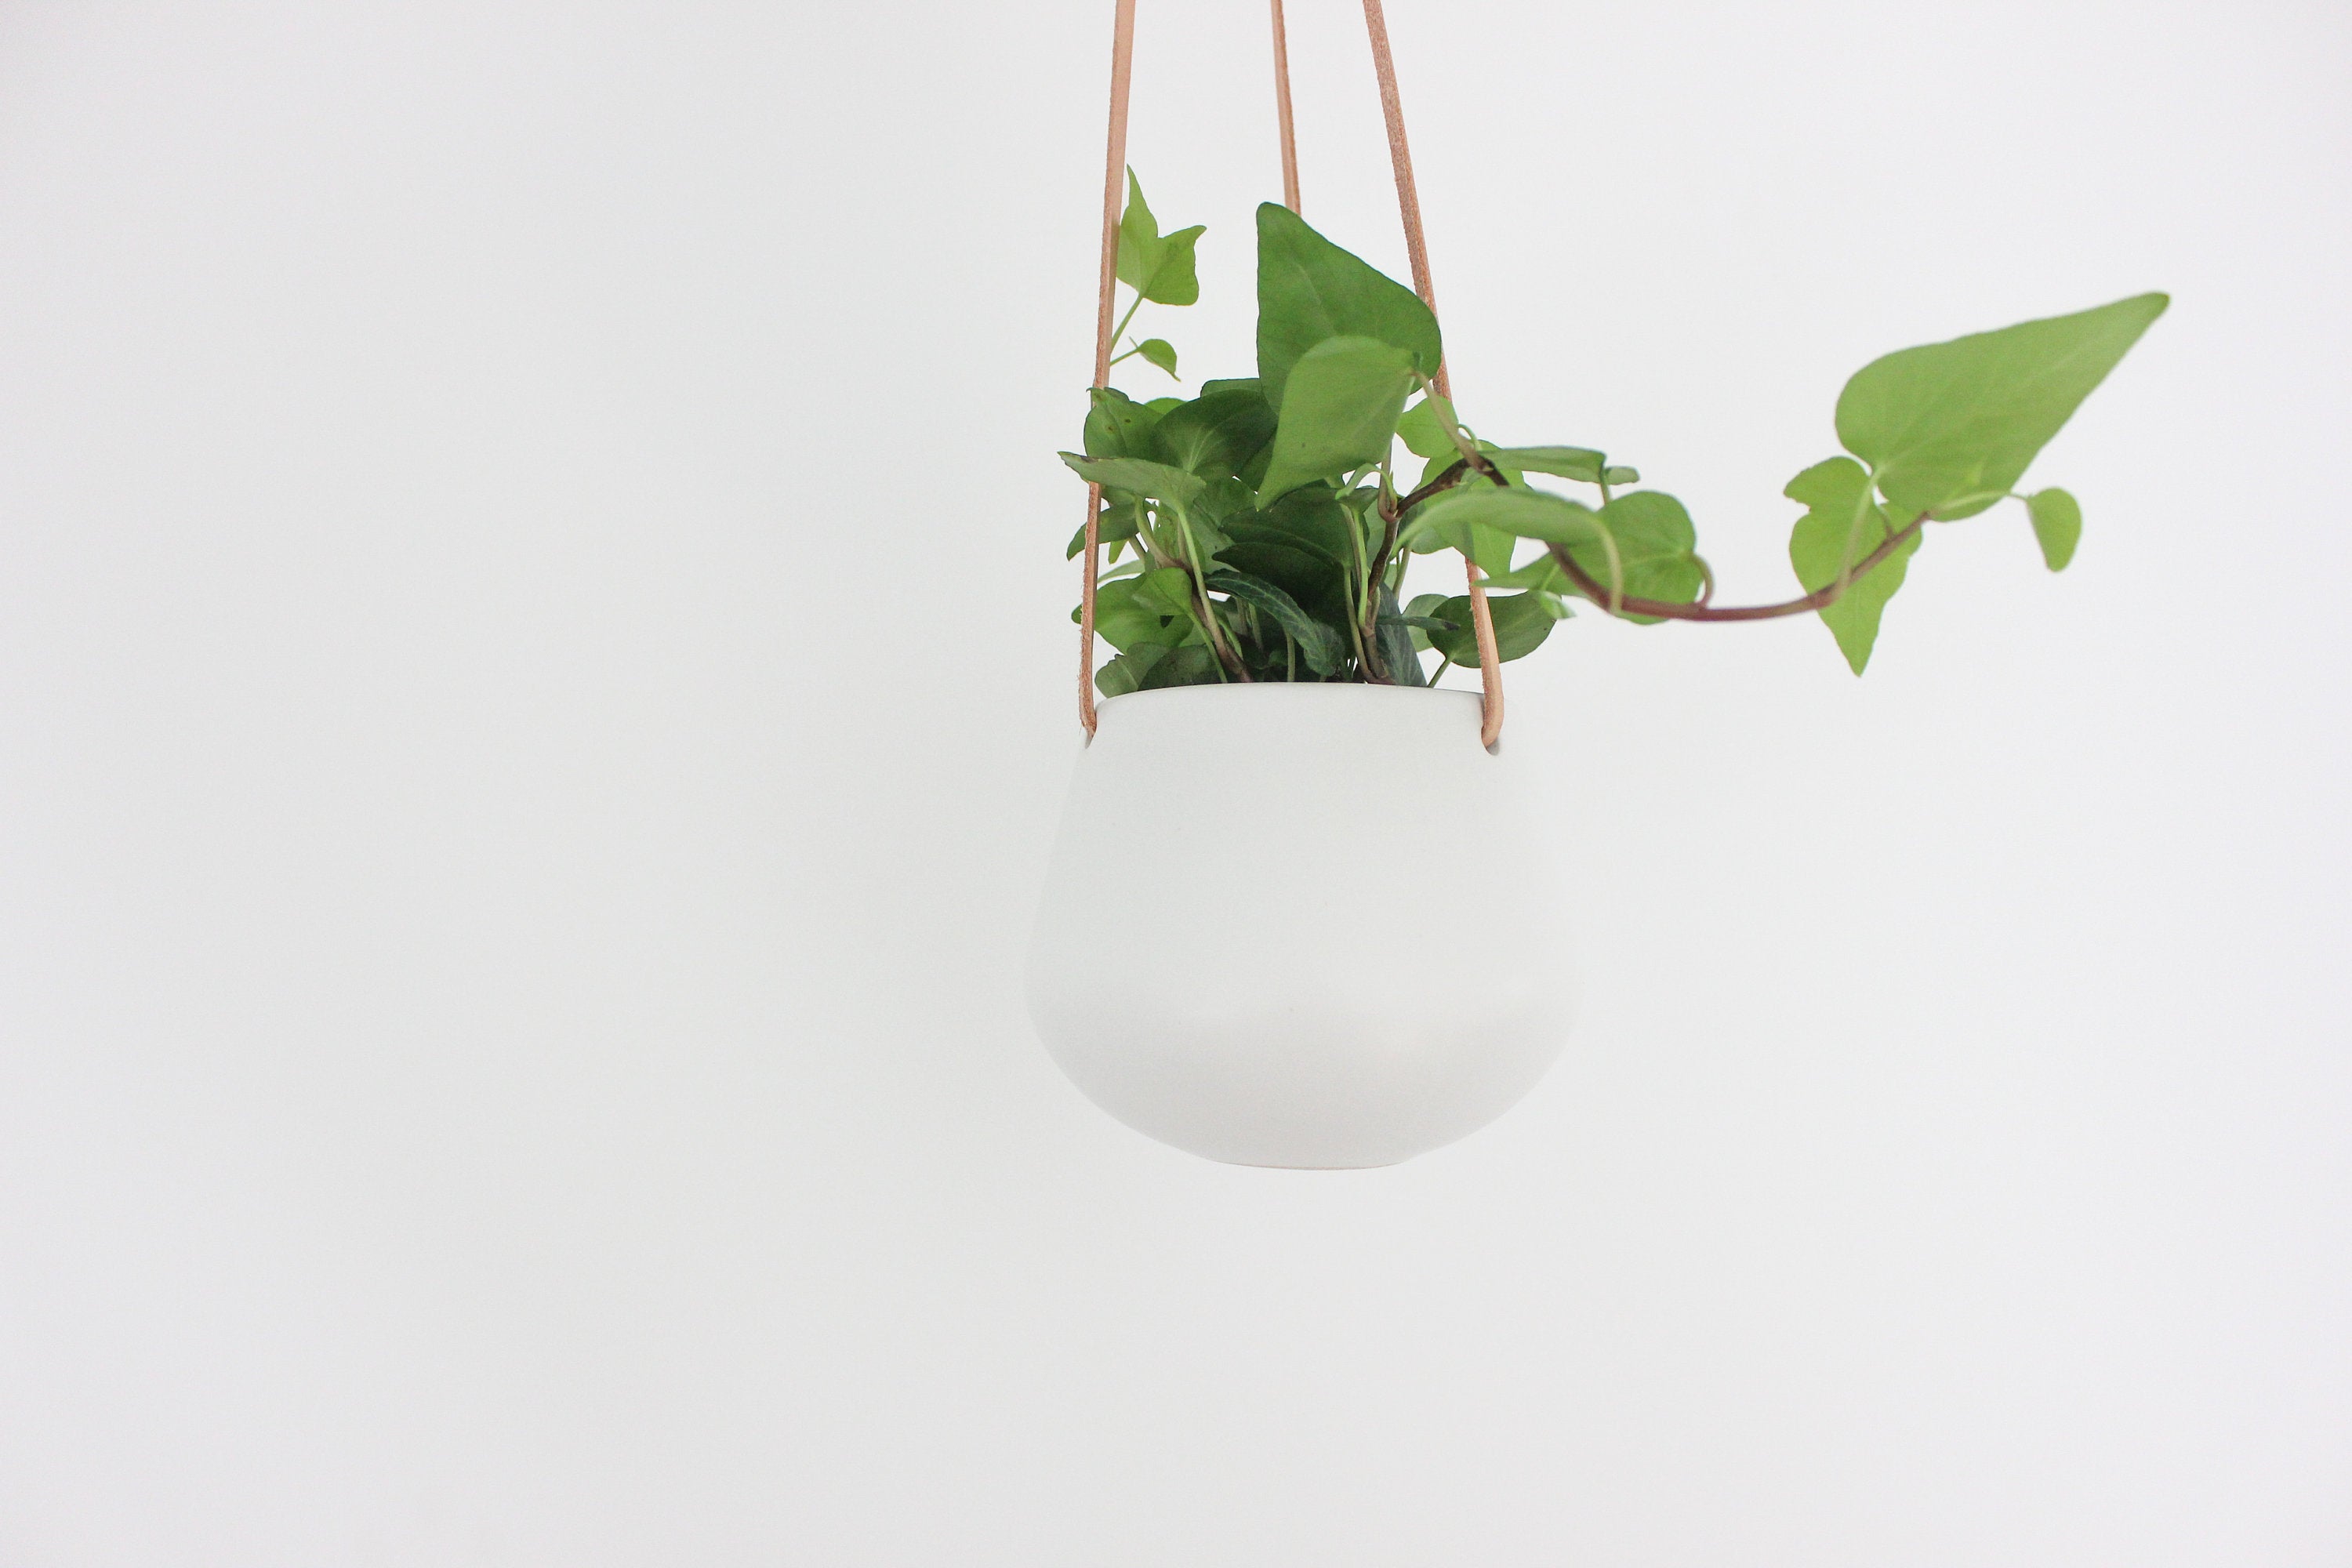 White Ceramic Hanging Planter Pot with Leather Cord